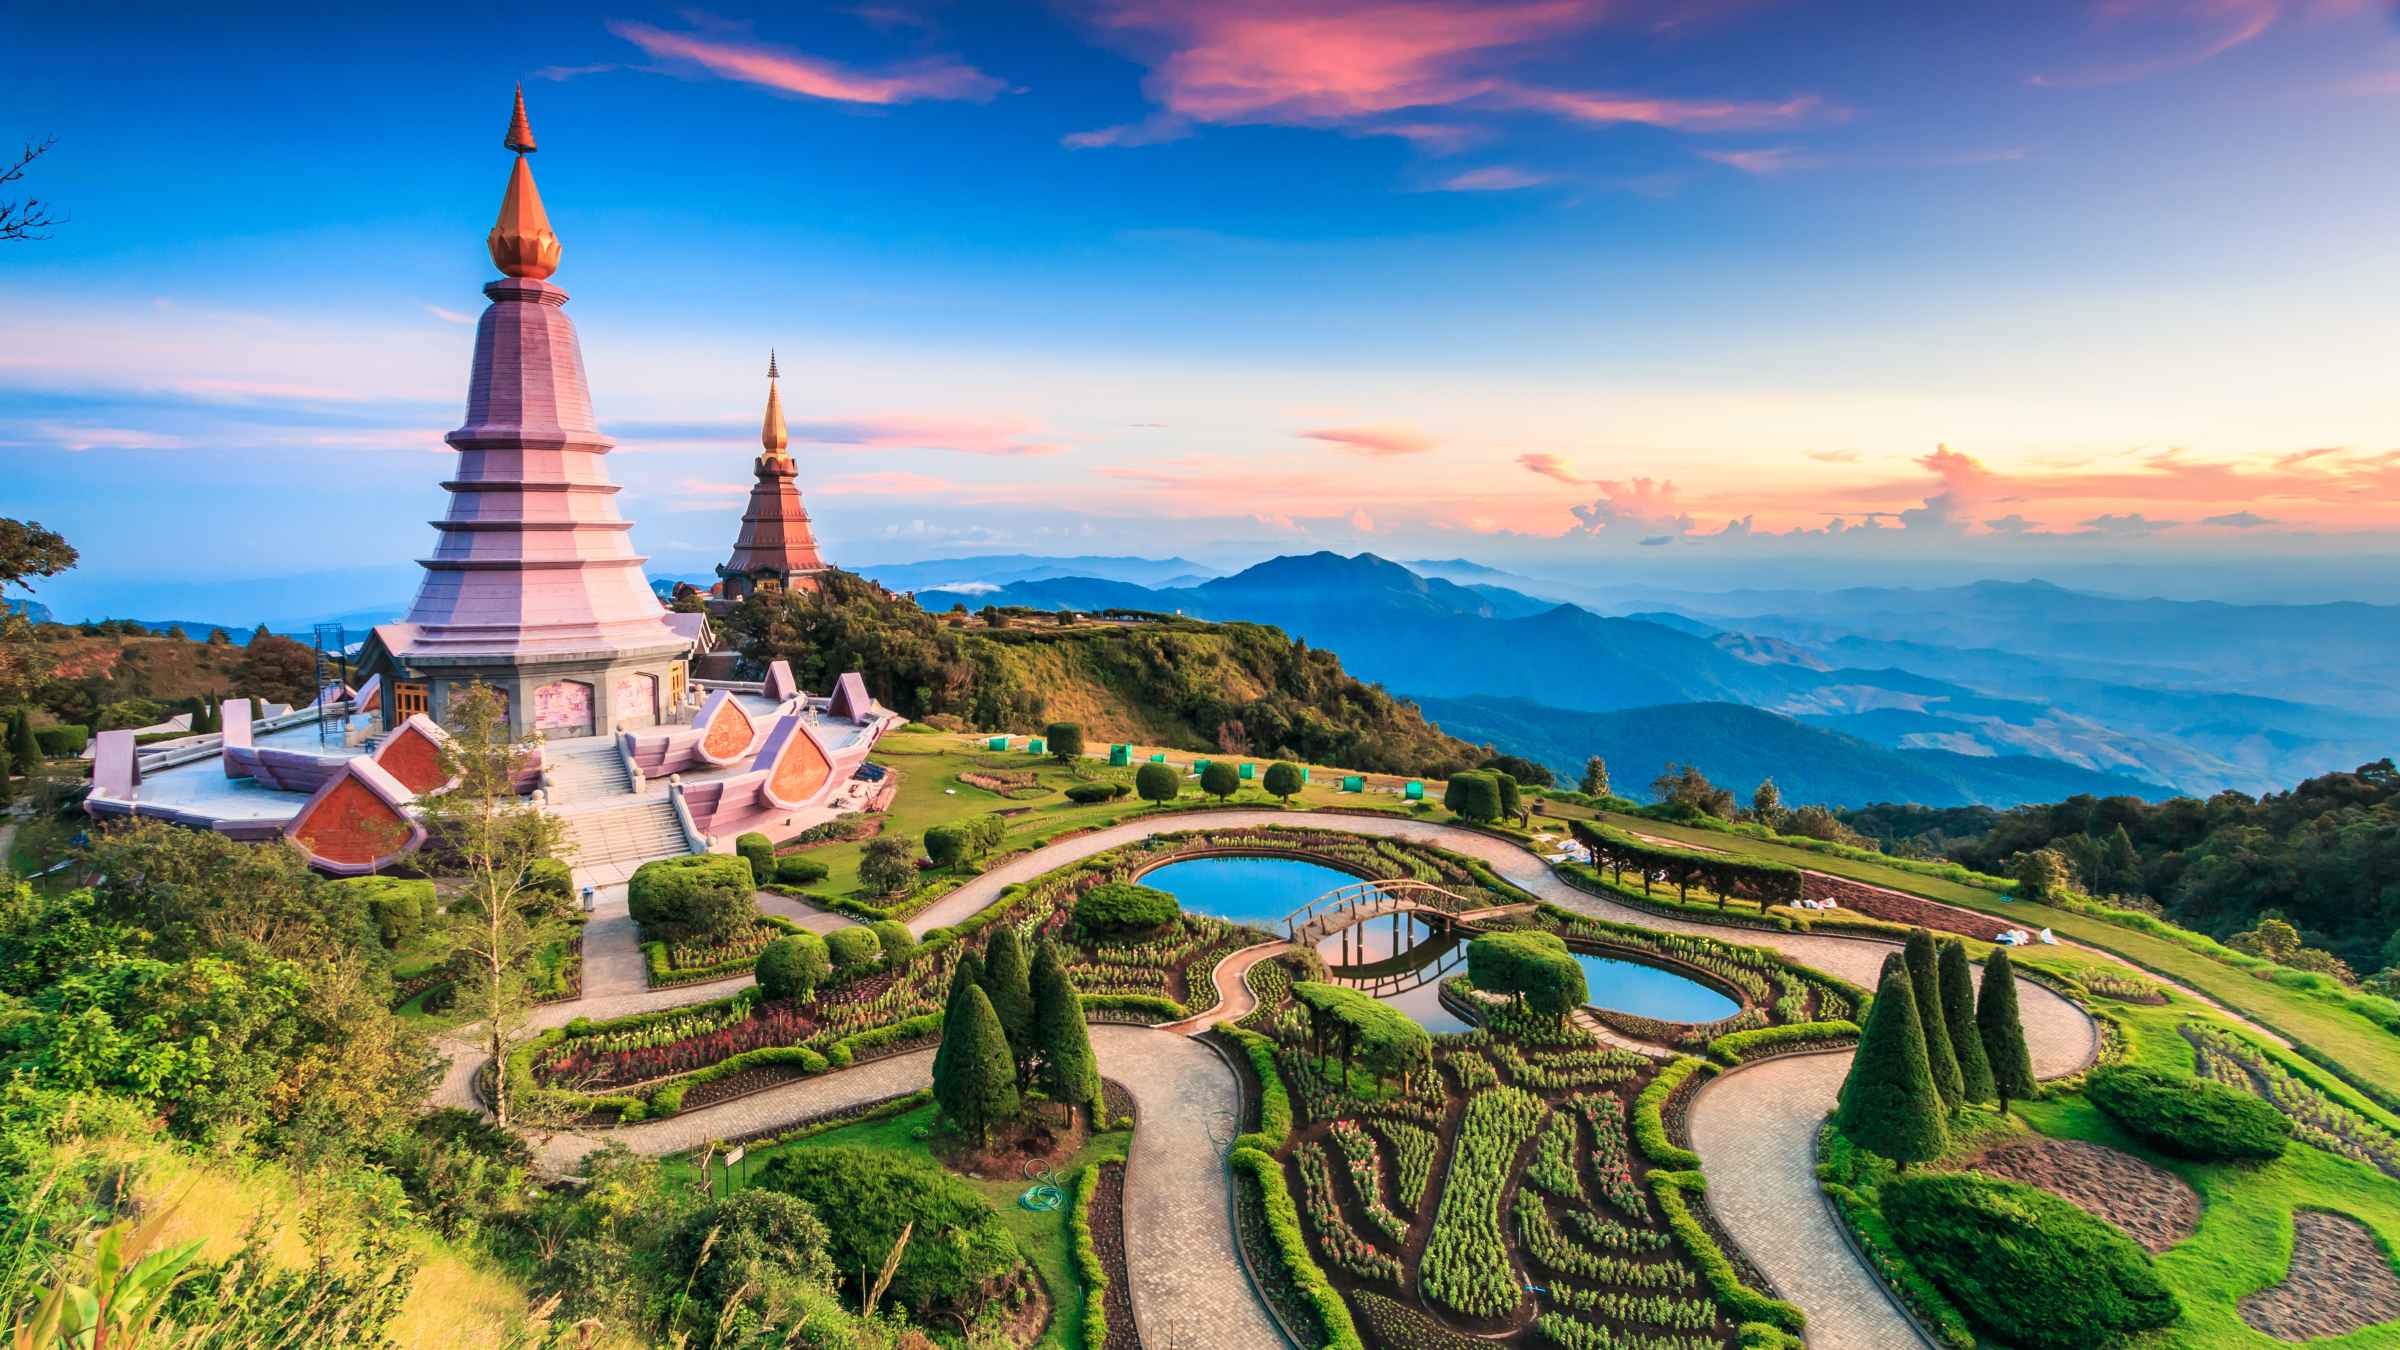 Thailand 2021: Top 10 Tours, Trips & Activities (with Photos) - Things to  Do in Thailand | GetYourGuide